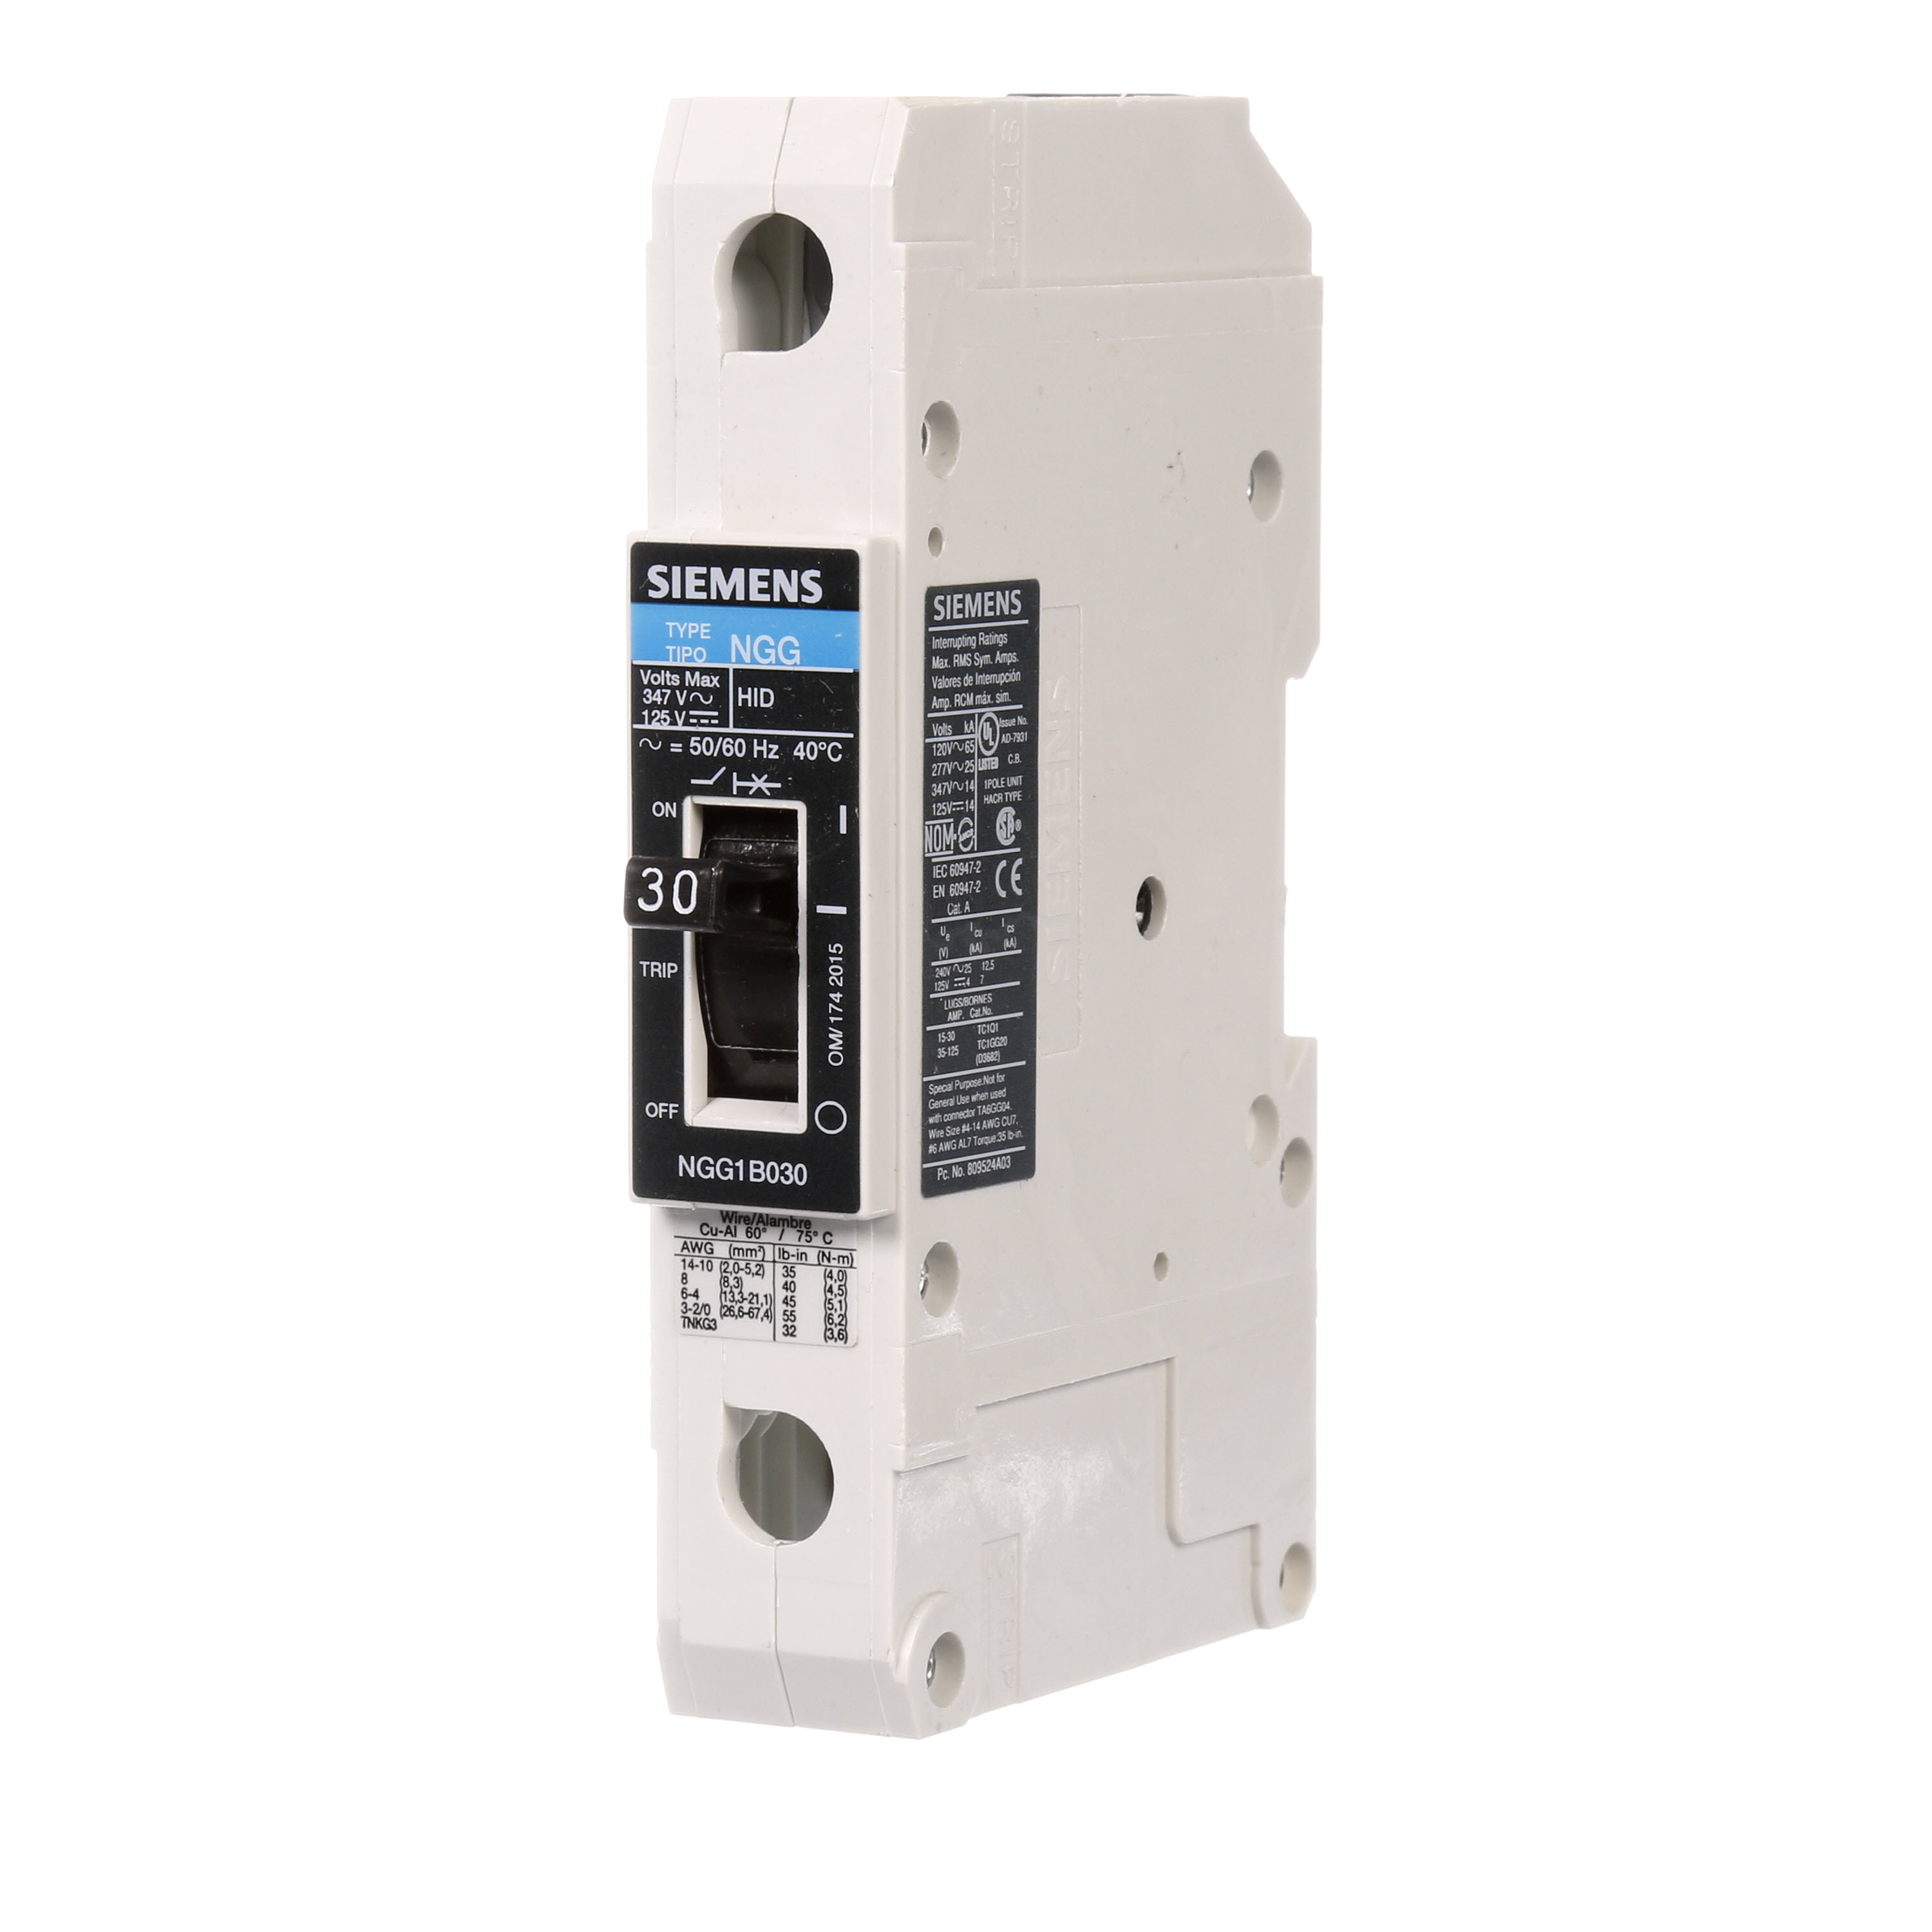 SIEMENS LOW VOLTAGE G FRAME CIRCUIT BREAKER WITH THERMAL - MAGNETIC TRIP. UL LISTED NGG FRAME WITH STANDARD BREAKING CAPACITY. 30A 1-POLE (14KAIC AT 347V) (25KAIC AT 277V). SPECIAL FEATURES MOUNTS ON DIN RAIL / SCREW, LINE AND LOAD SIDE LUGS (TC1Q1) WIRE RANGE 14 - 10 AWS (CU/AL). DIMENSIONS (W x H x D) IN 1 x 5.4 x 2.8.